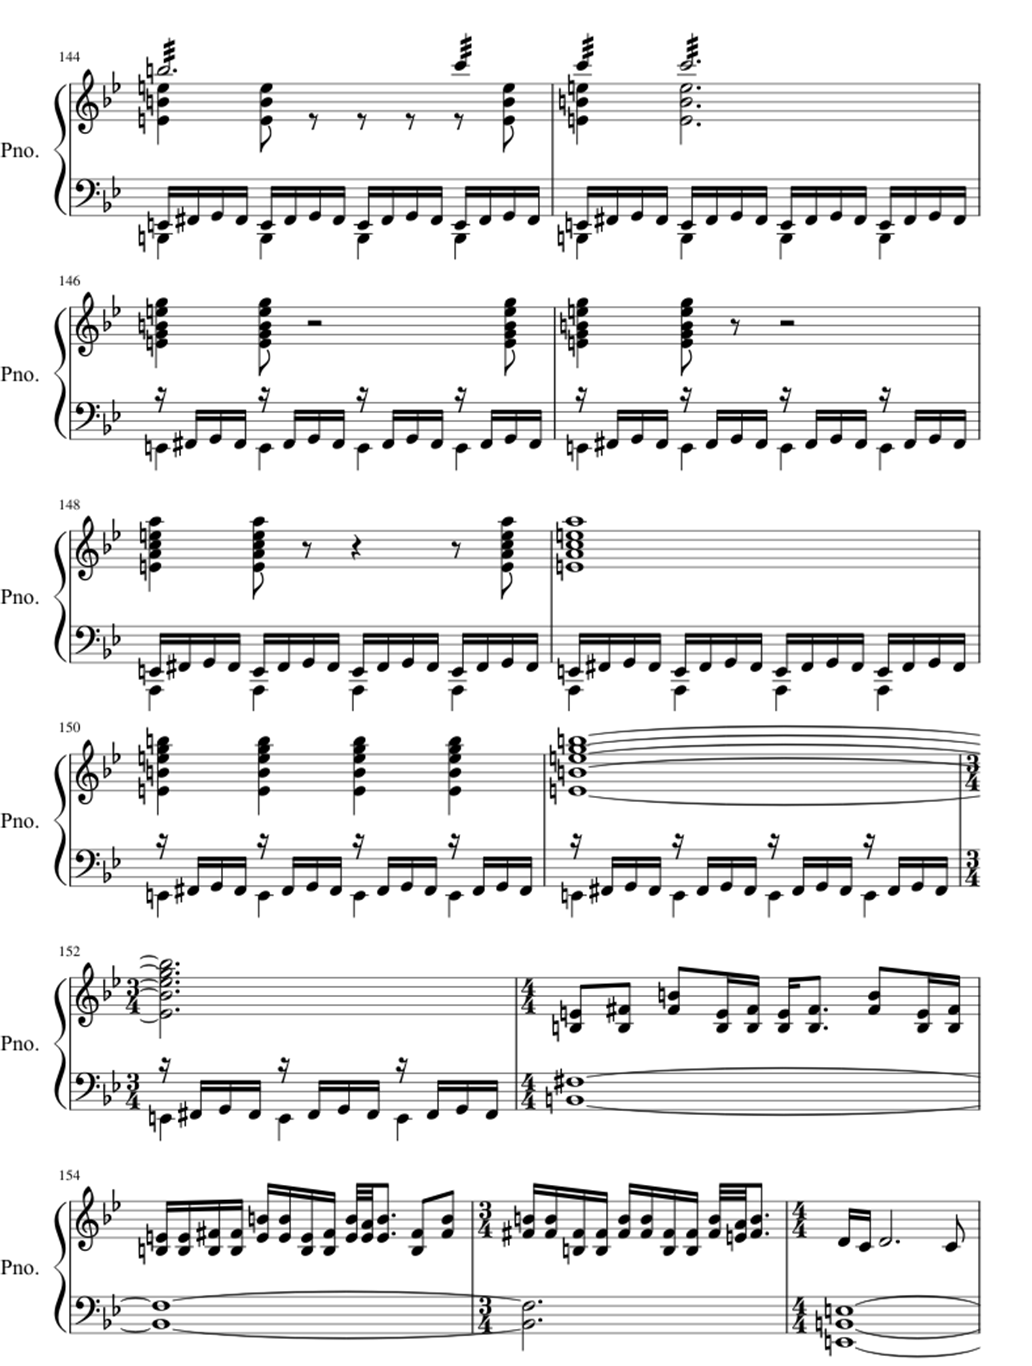 A knife in the dark sheet music notes 6